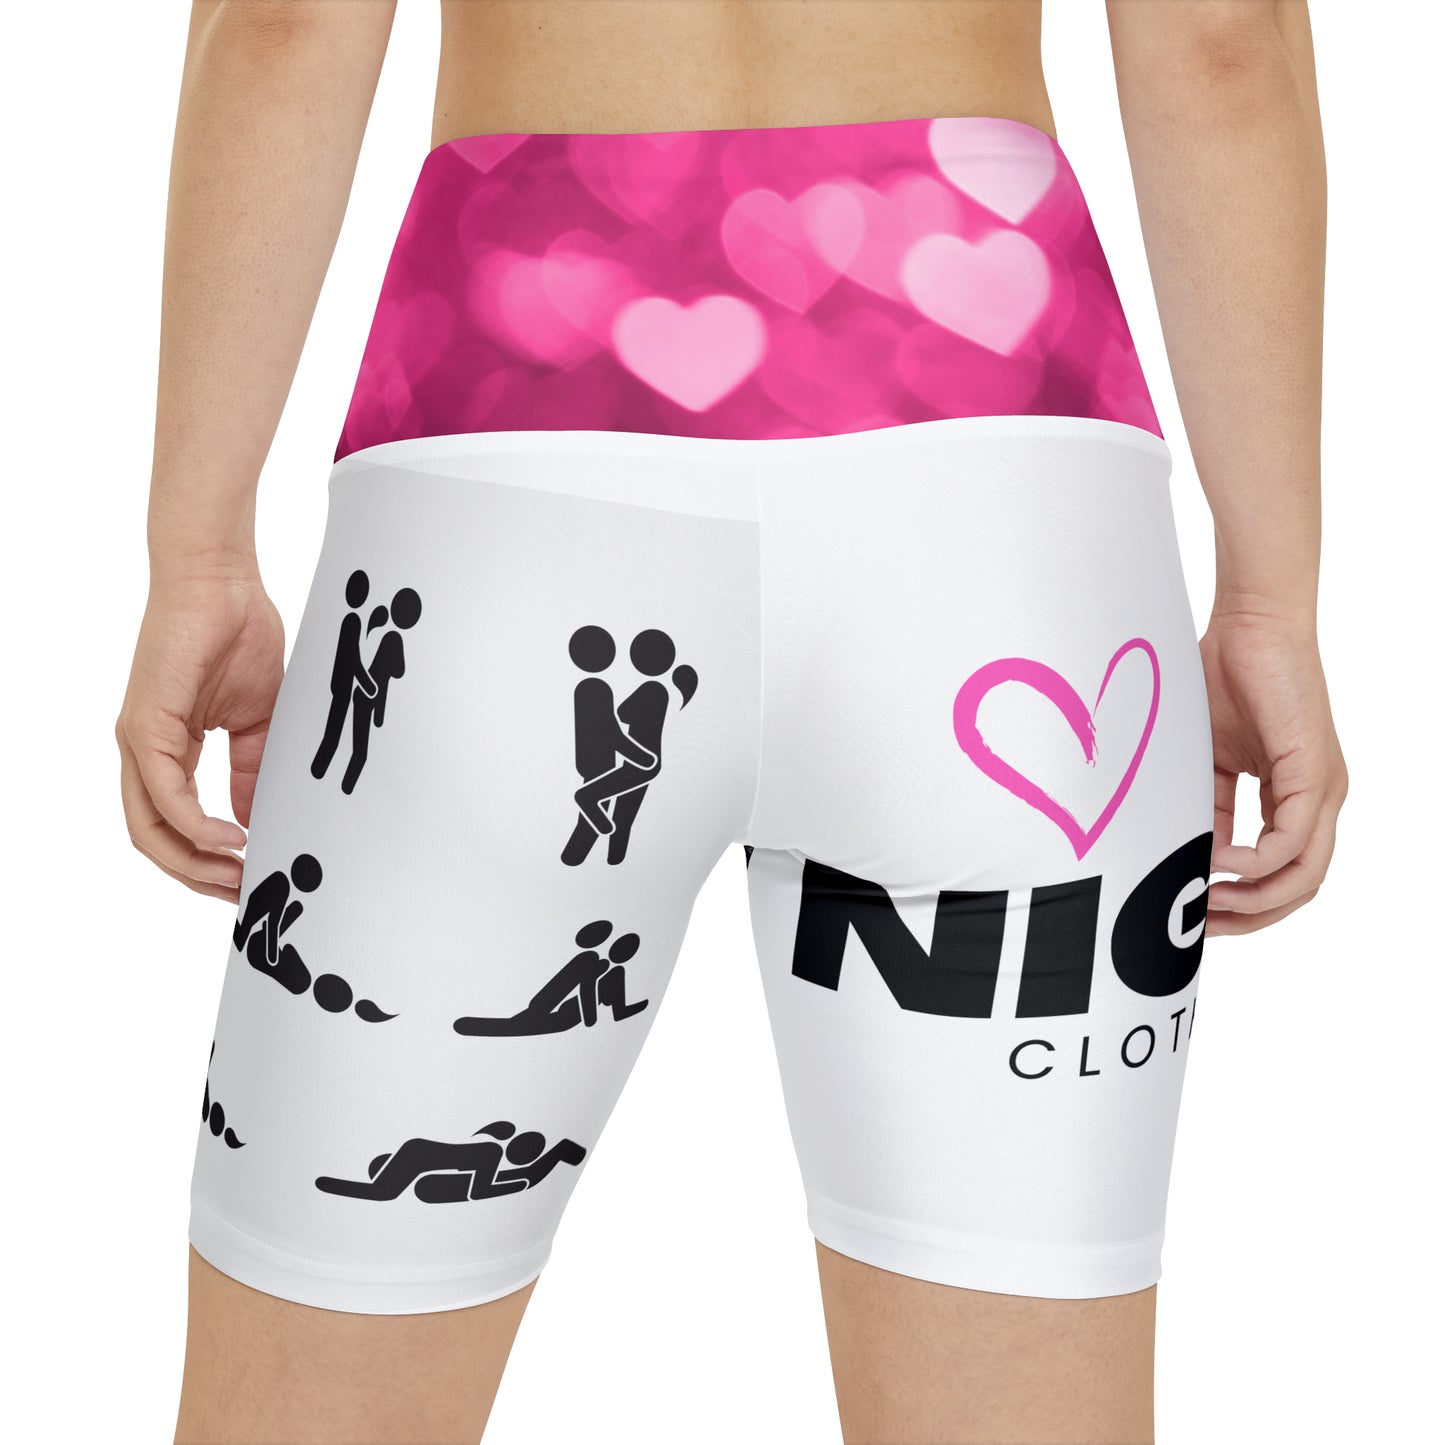 Choose Your Position Women's Workout Shorts (NighteenClothingCo)